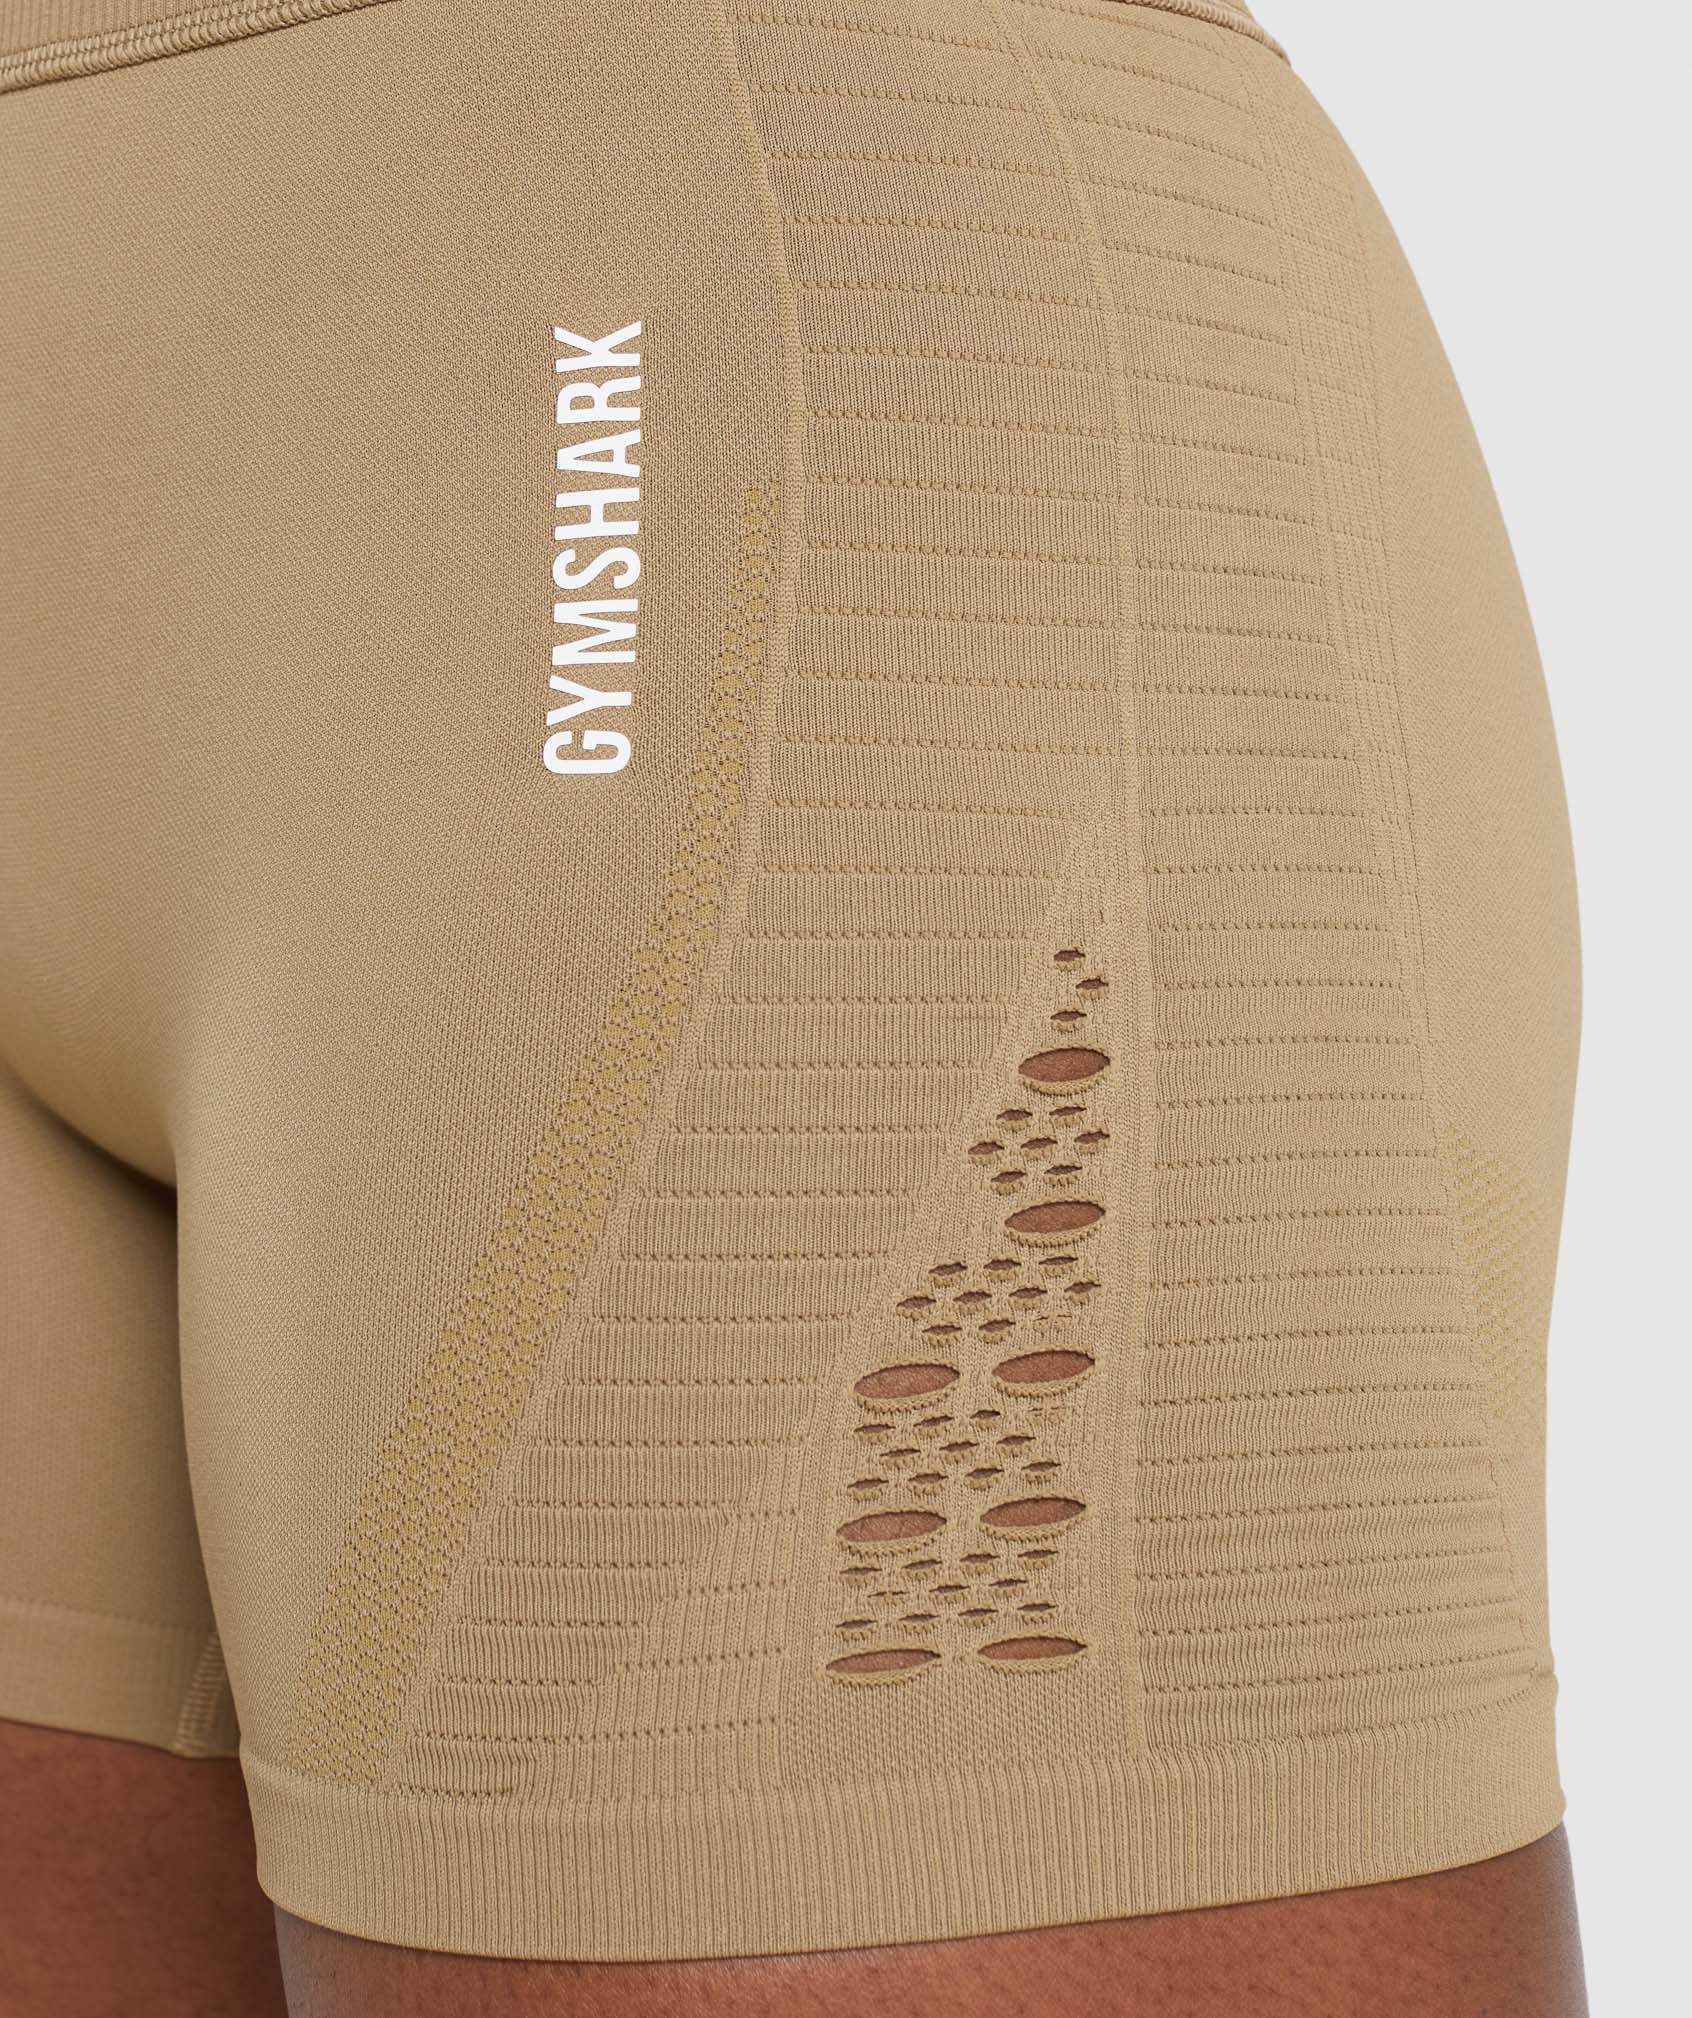 Energy Seamless Shorts in Biscotti Brown - view 5